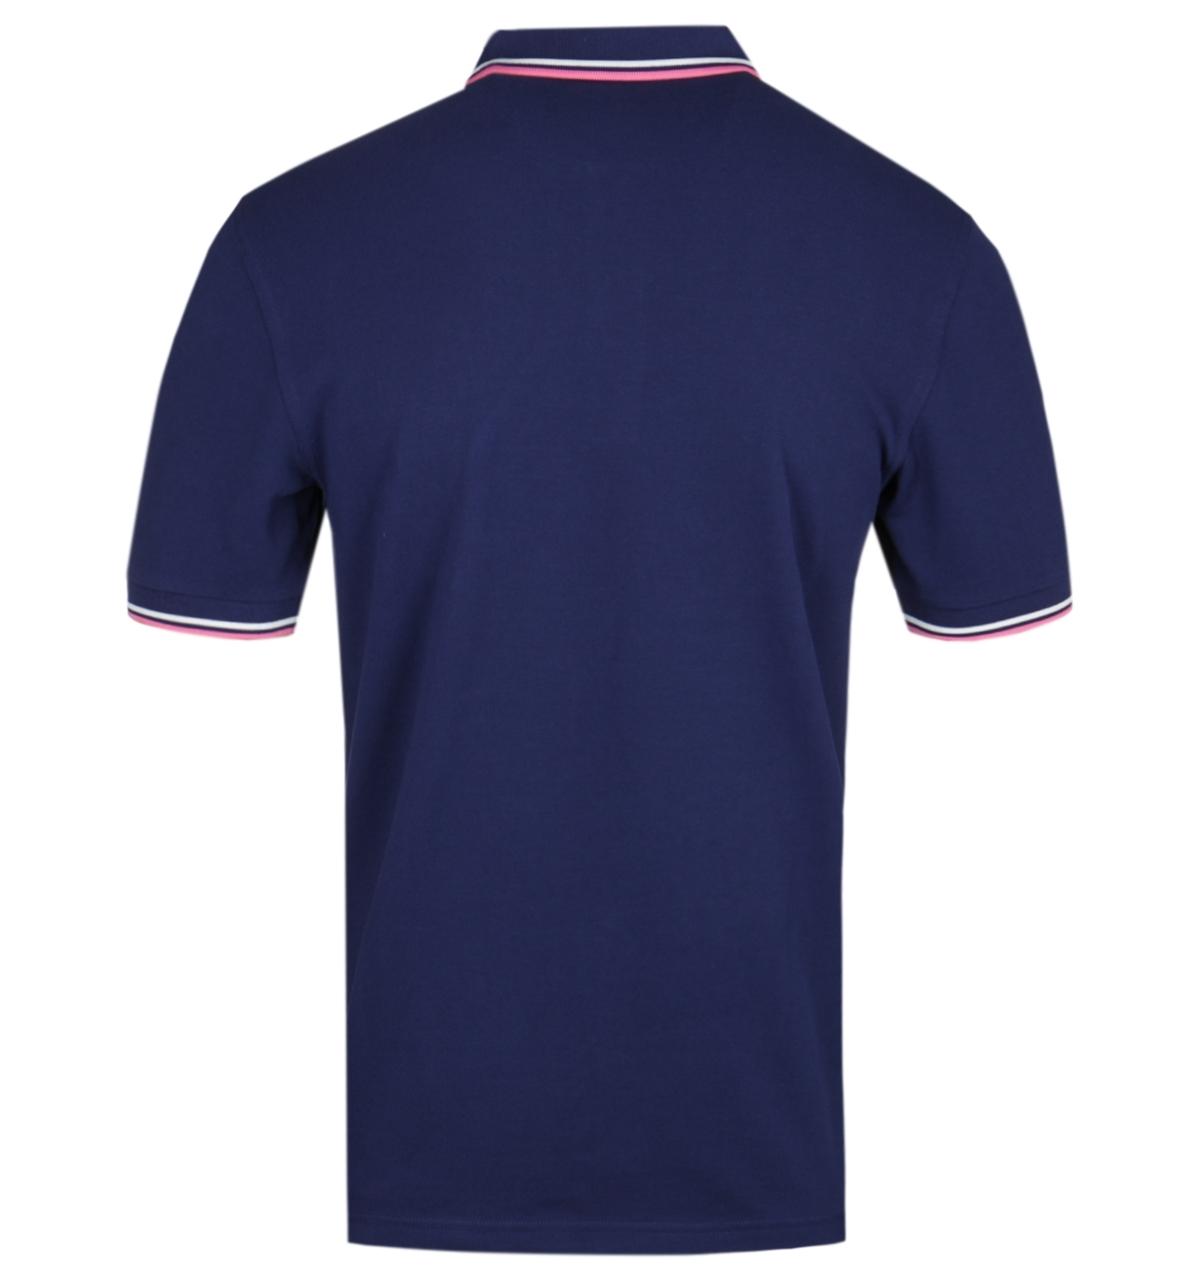 navy blue and pink polo shirt